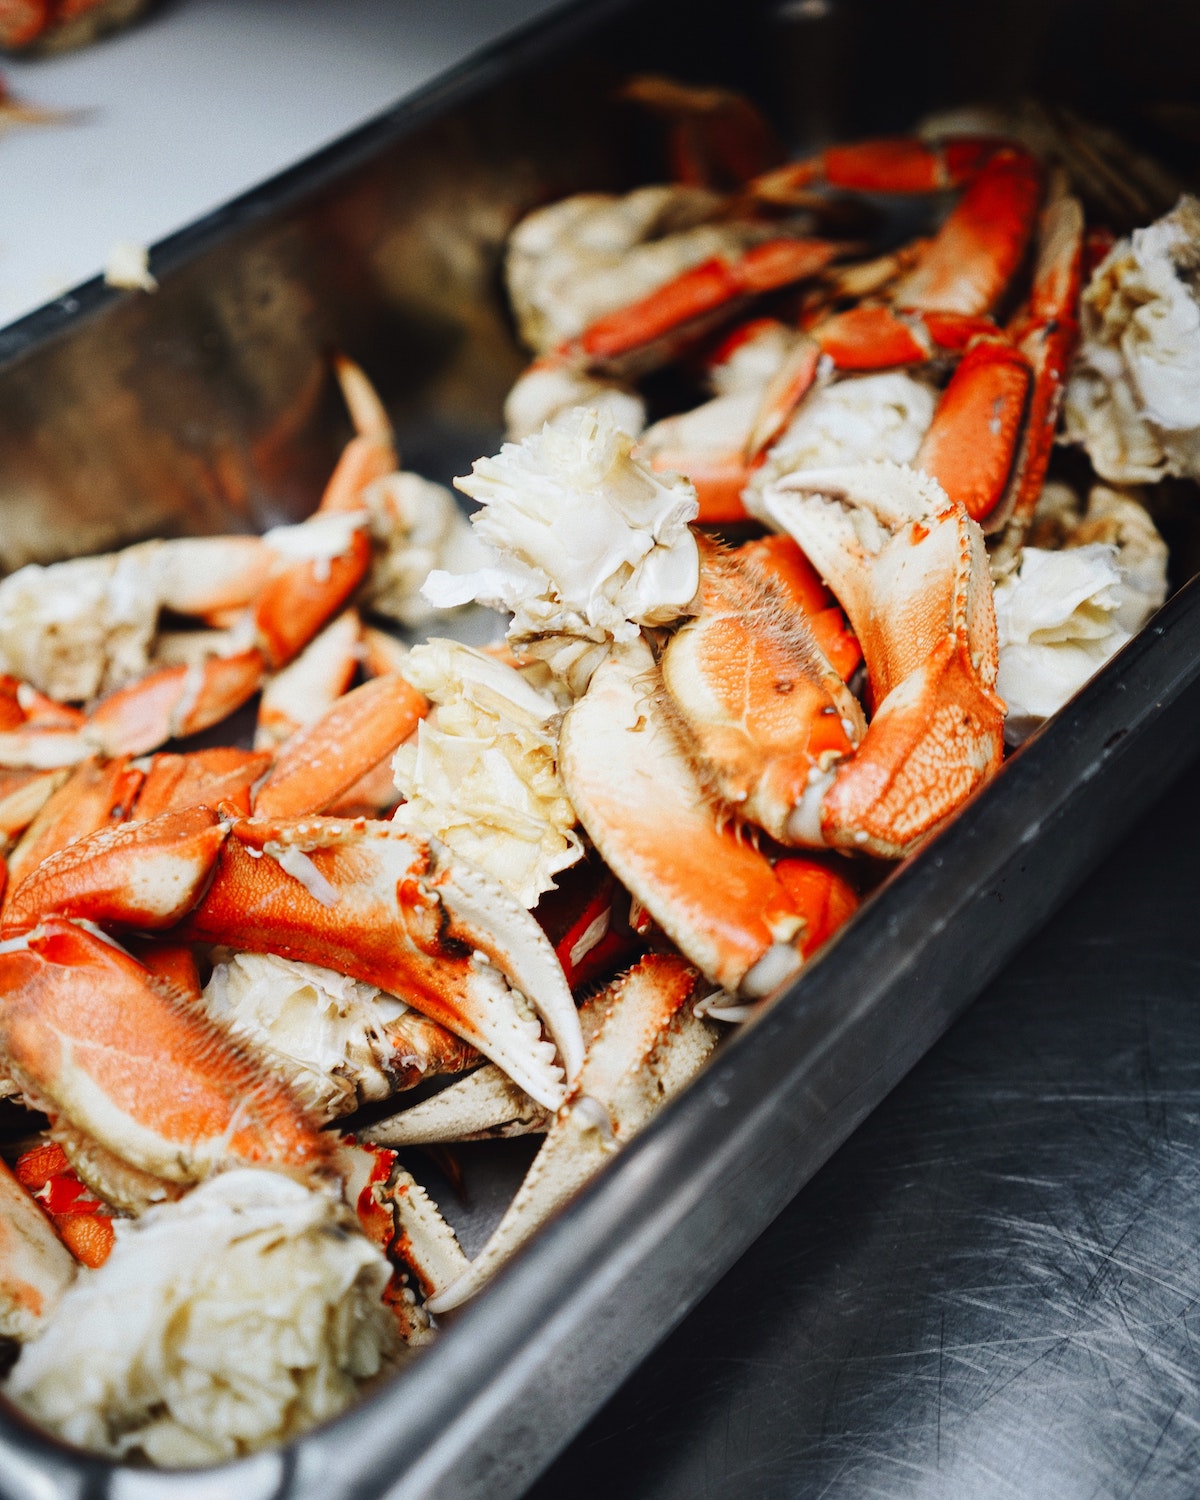 Extreme close up of a baking tray with cooked crab.